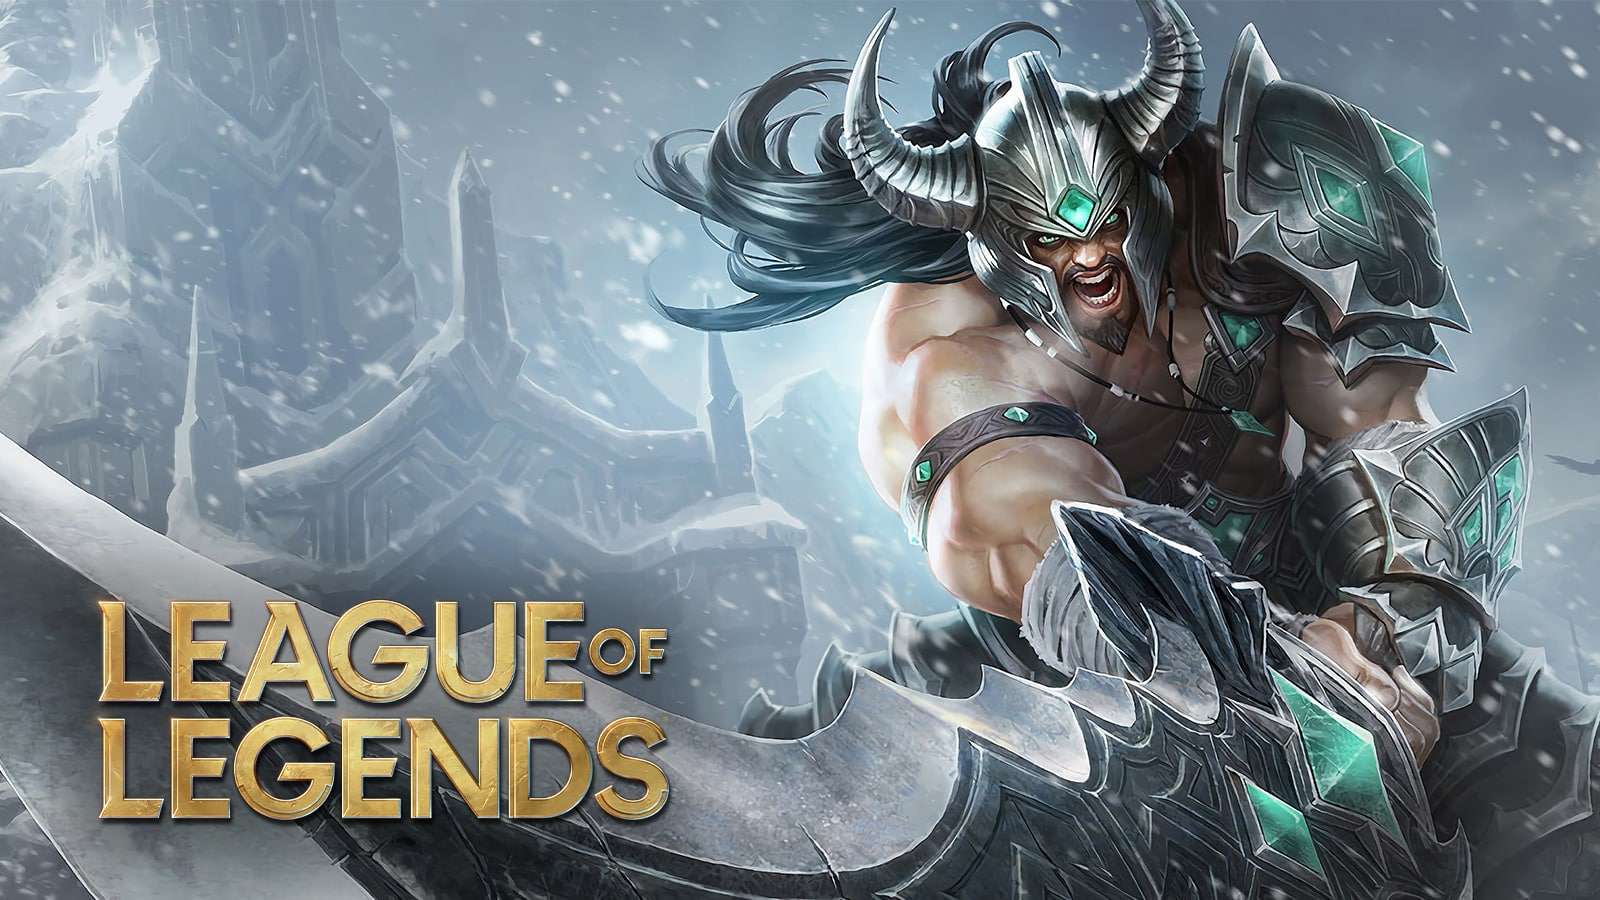 Tryndamere League of Legends